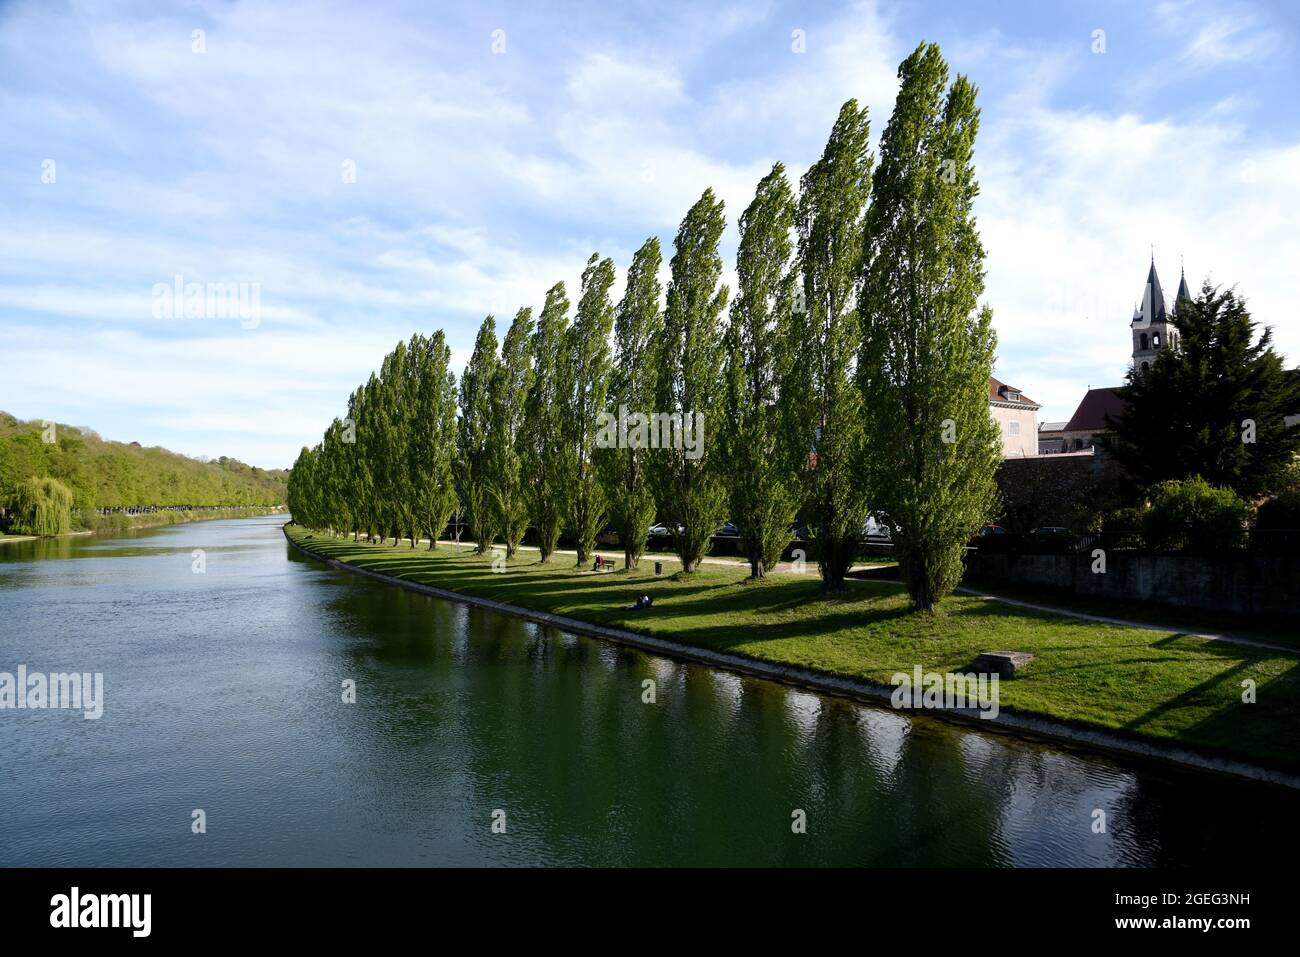 Melun (Paris area): banks of the River Seine and poplars Stock Photo